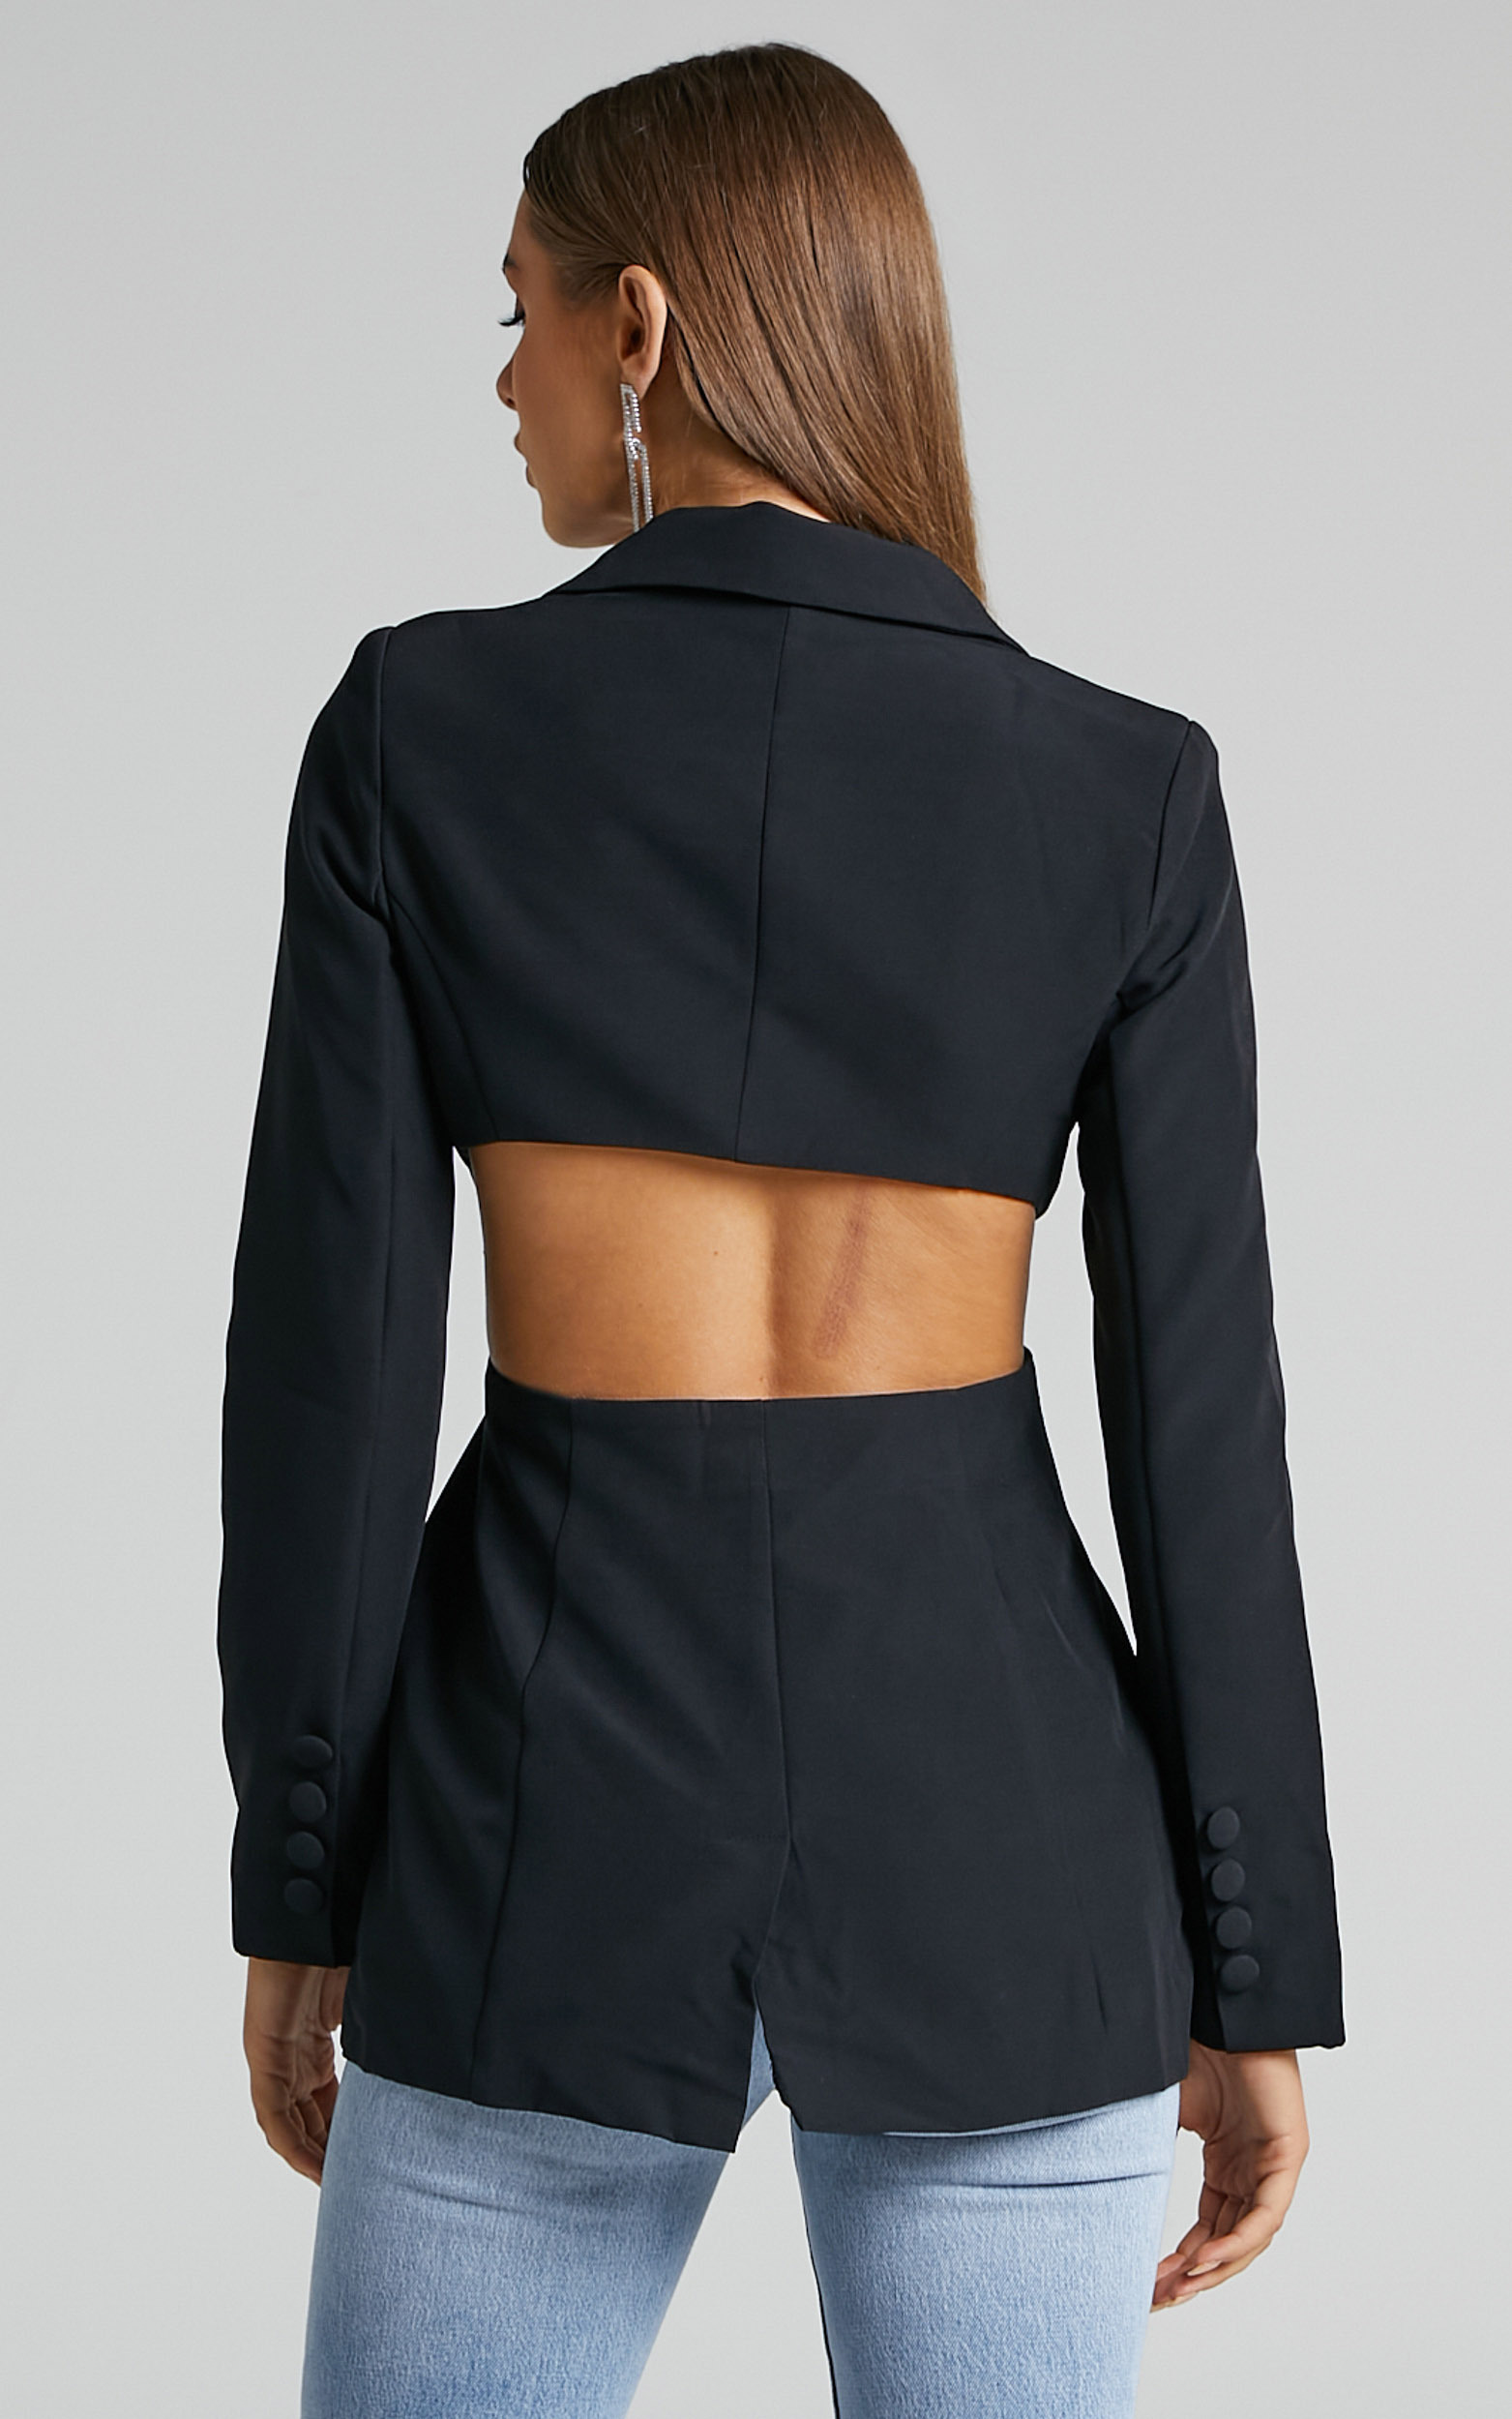 Chona Tailored Hourglass Cut Out Blazer in Black